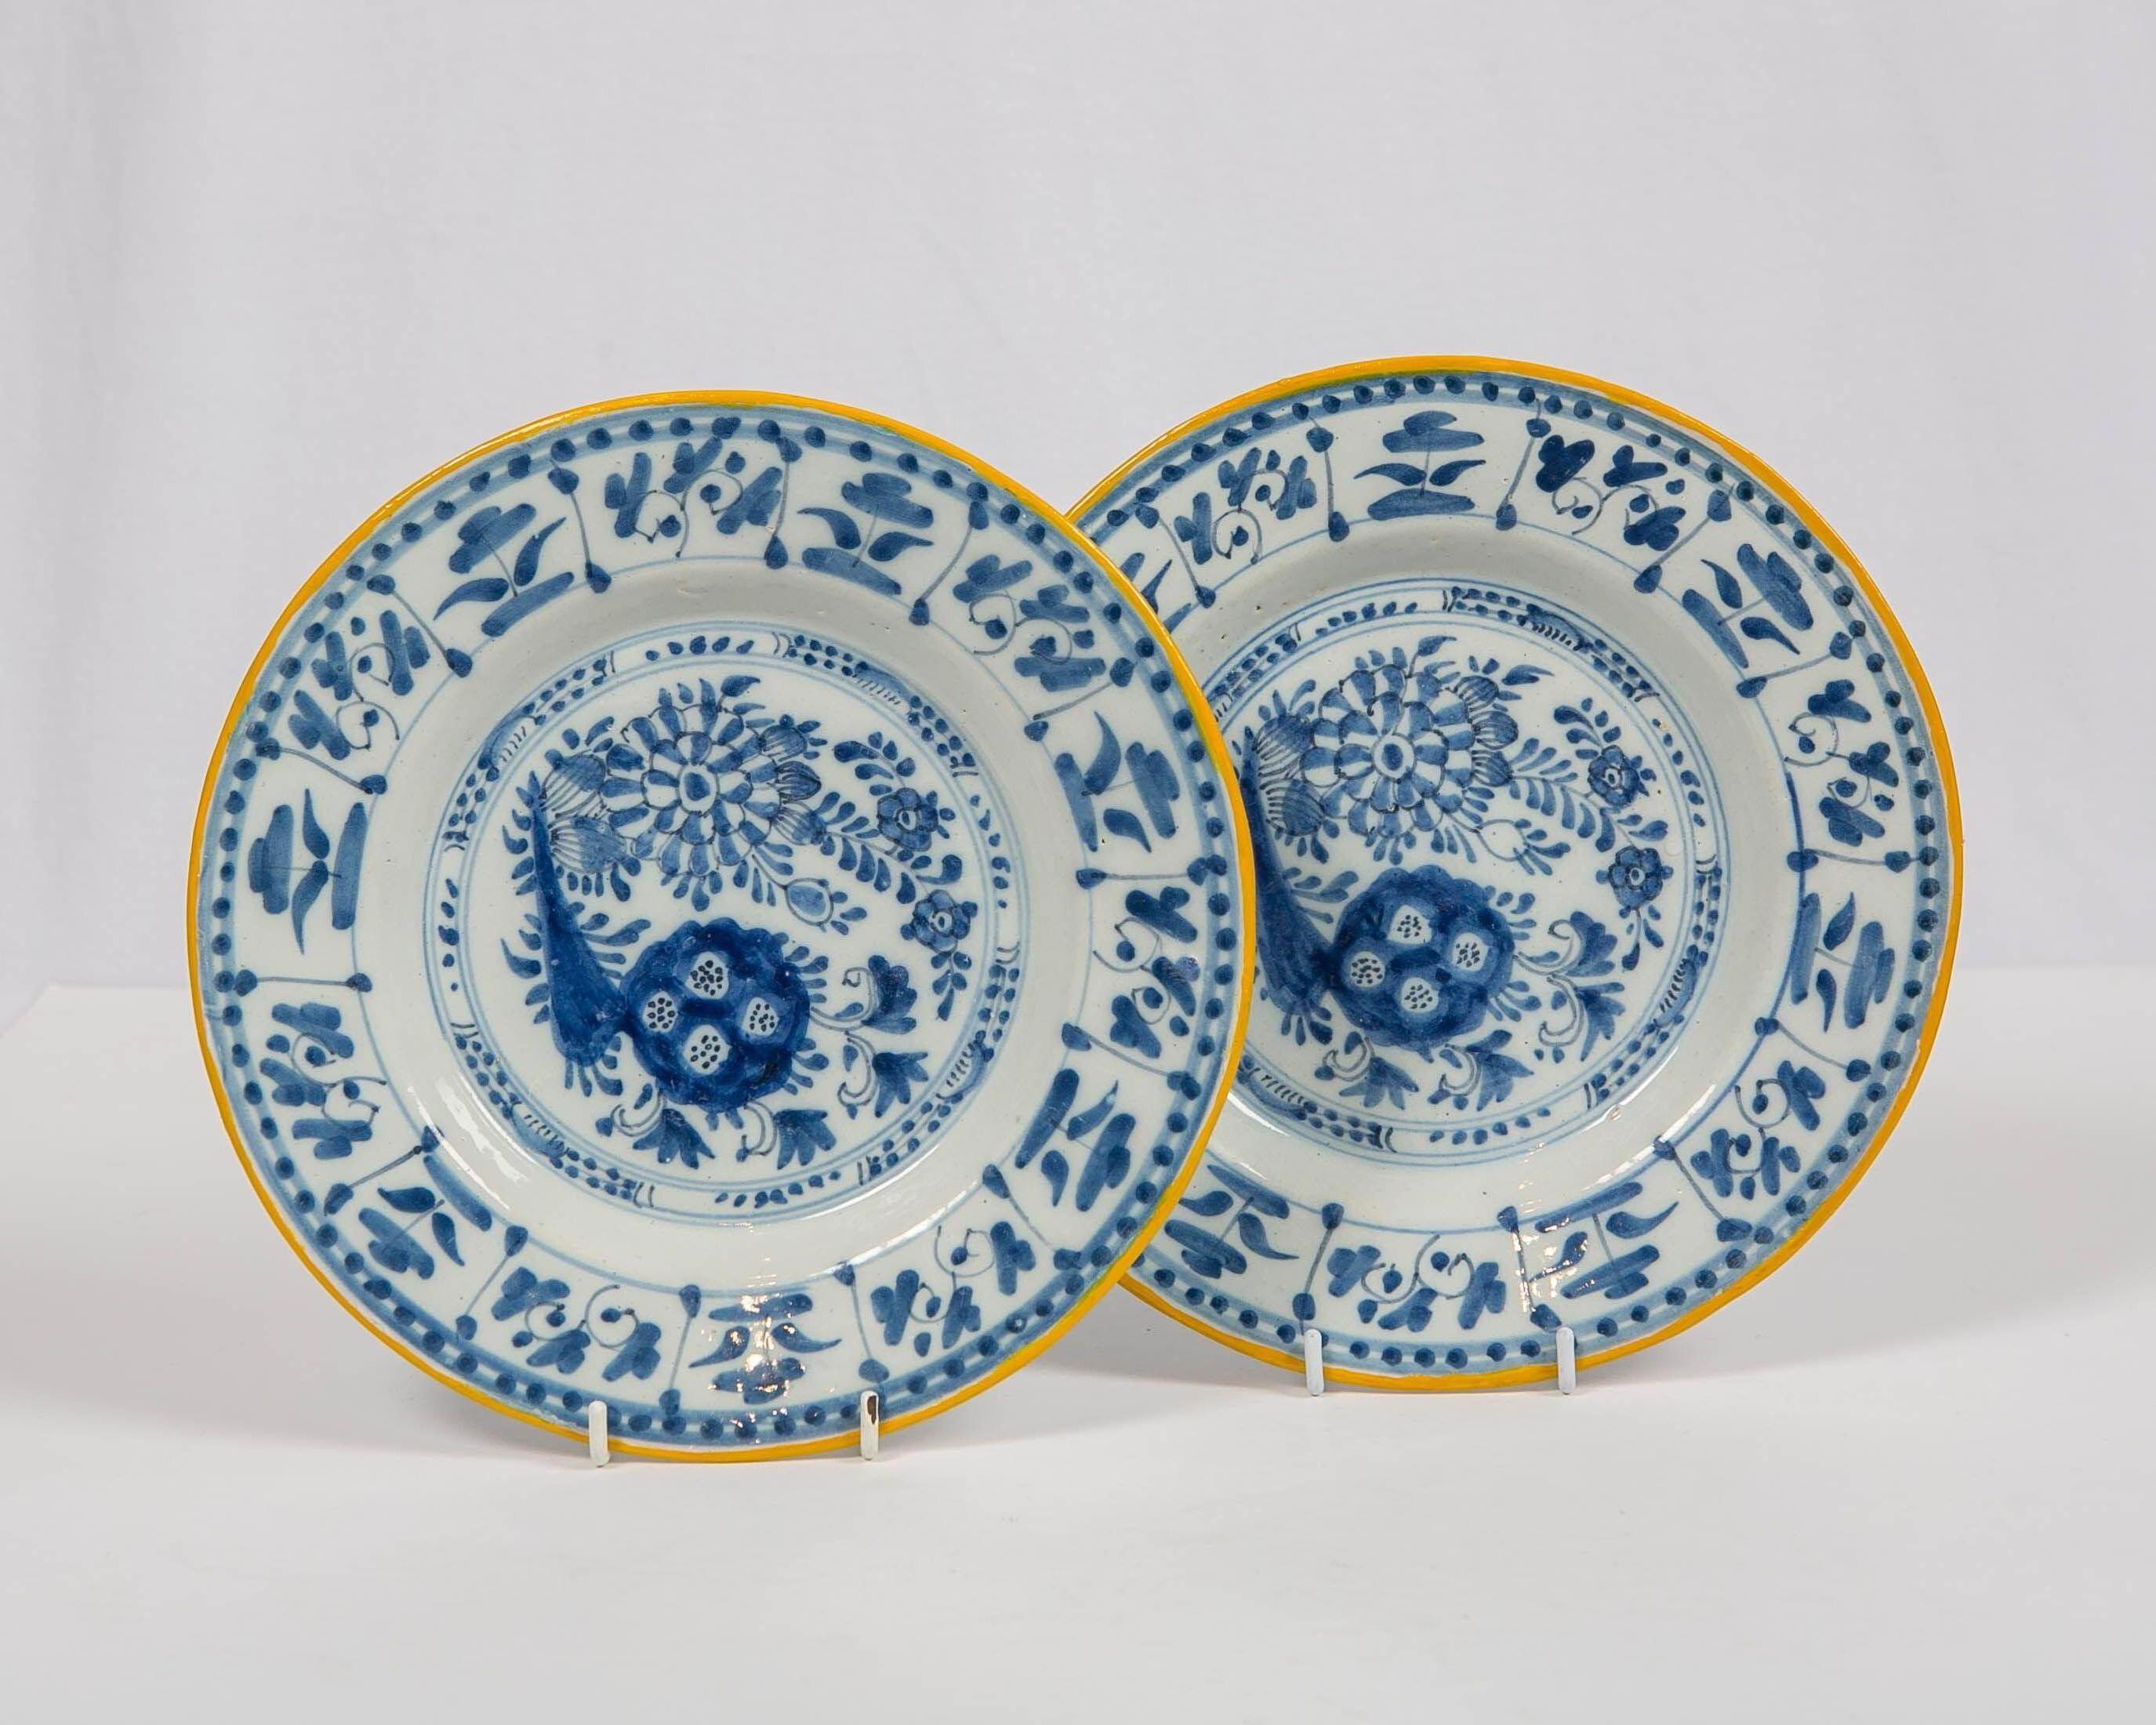 We are pleased to offer this pair of antique Dutch Delft blue and white plates which are hand painted with a lively scene of flowers, leaves and scrolling vines. The painter used both medium and deep cobalt blue to create the garden scene. The edge